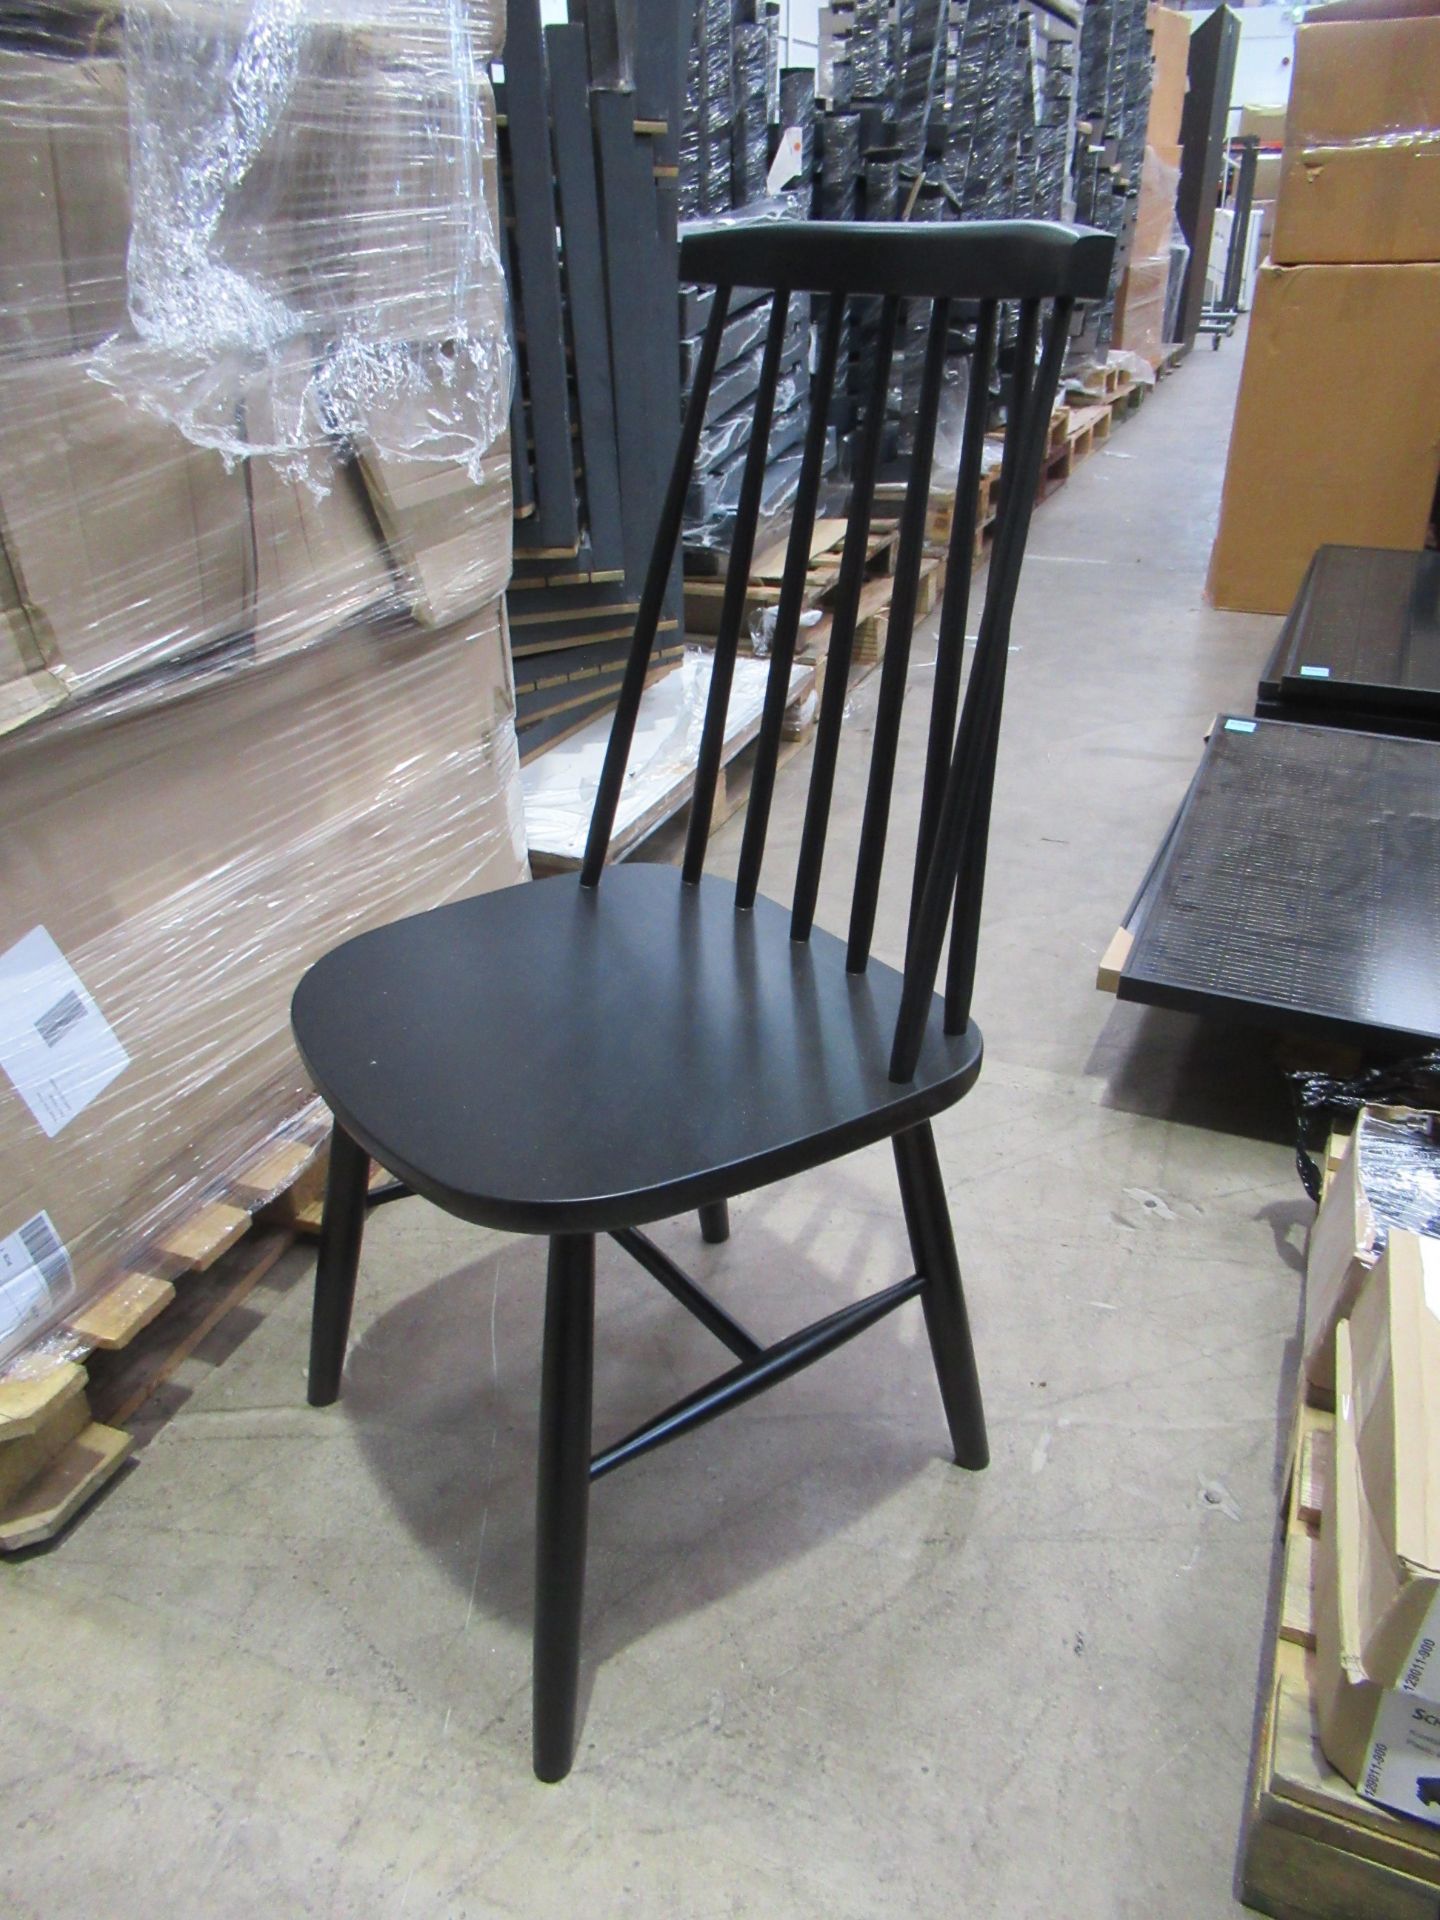 6x Boxed Harper Chairs